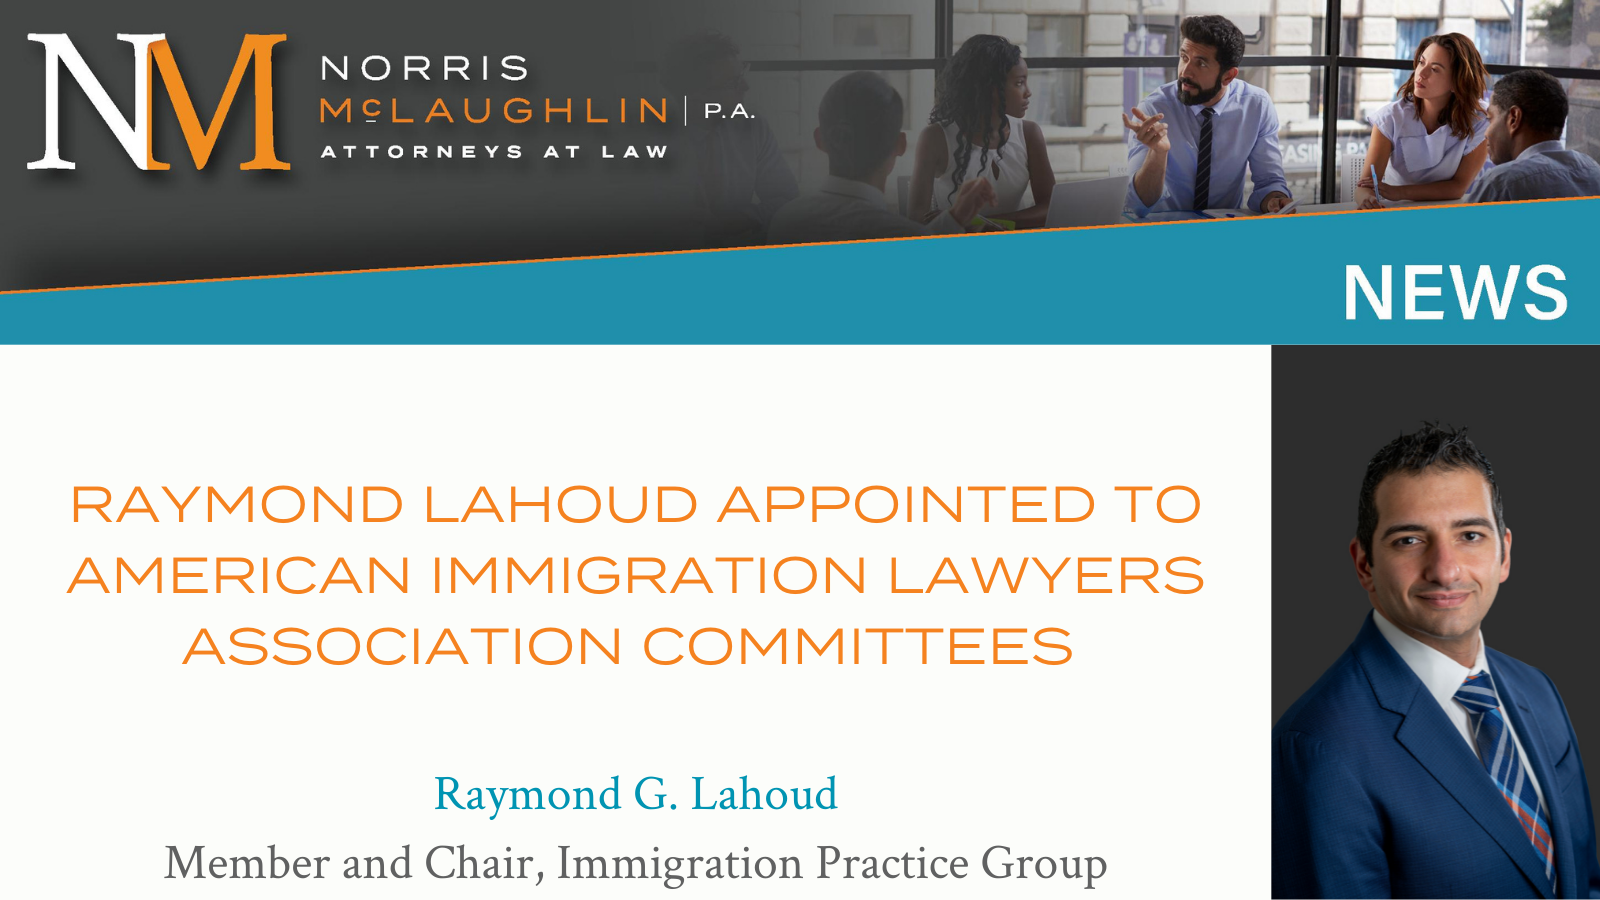 Raymond G. Lahoud Appointed to American Immigration Lawyers Association Committees